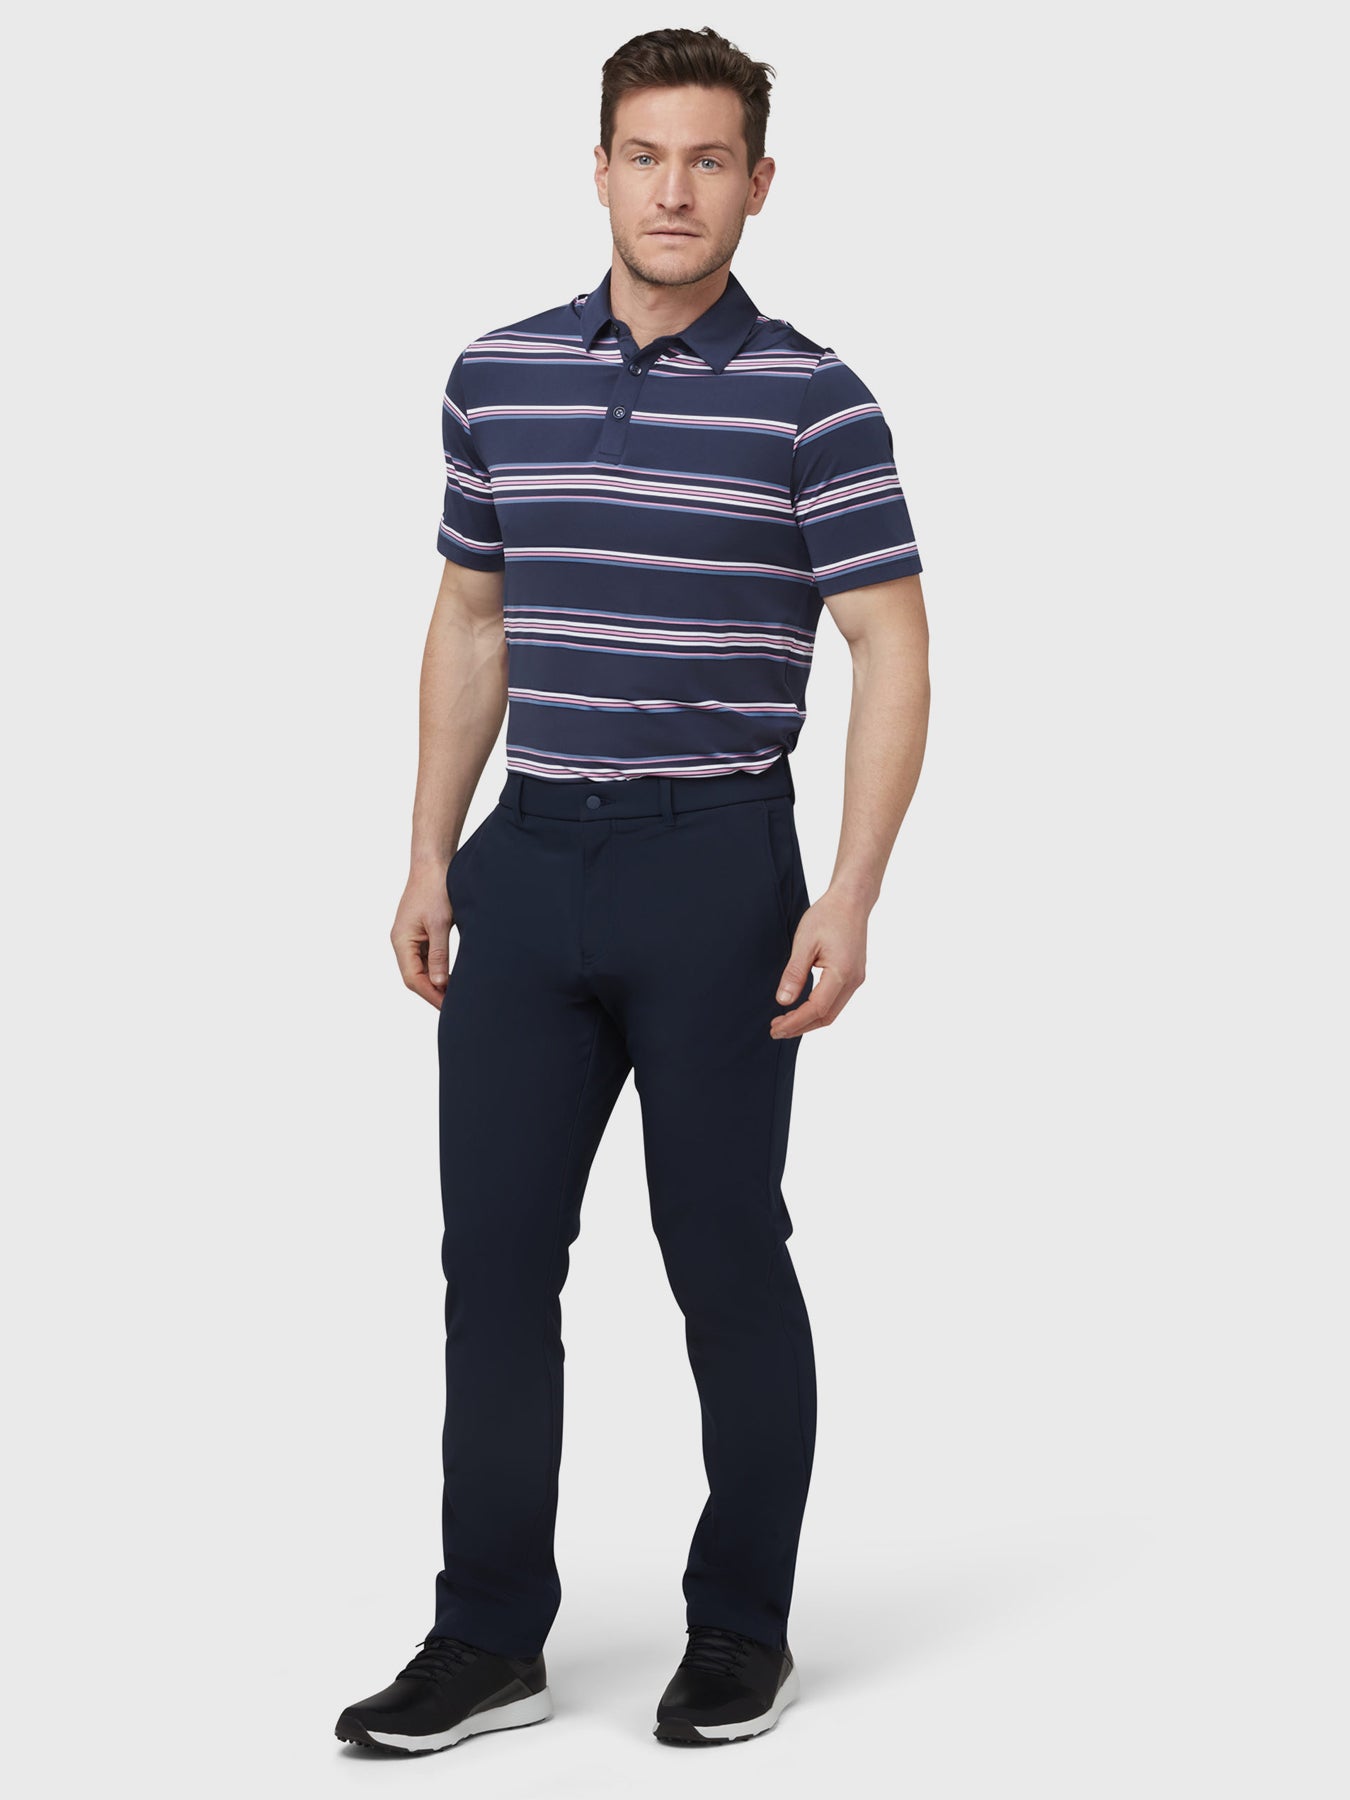 View Resort Ventilated Stripe Golf Polo In Peacoat Peacoat XL information